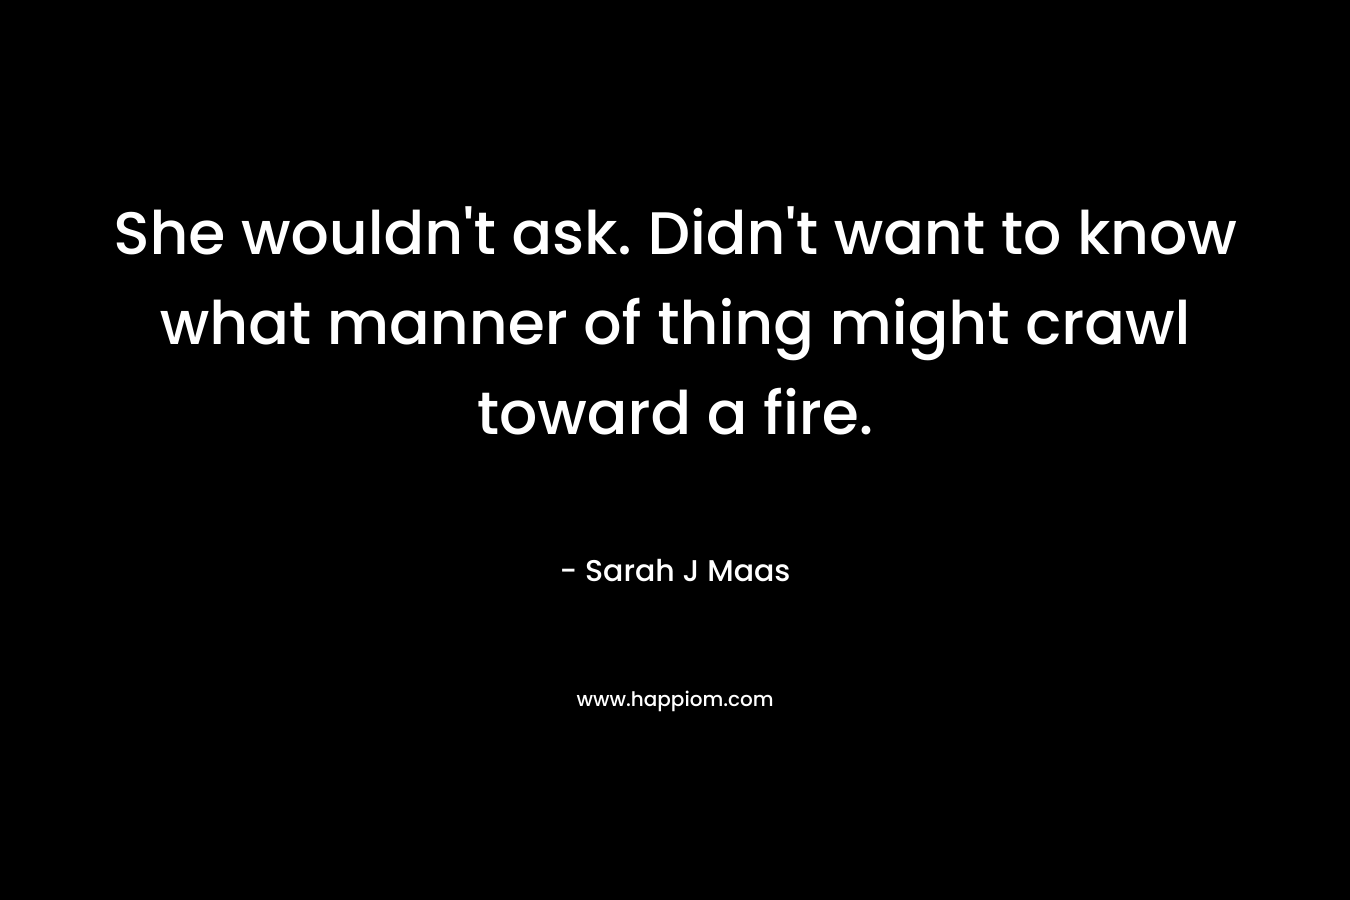 She wouldn’t ask. Didn’t want to know what manner of thing might crawl toward a fire. – Sarah J Maas